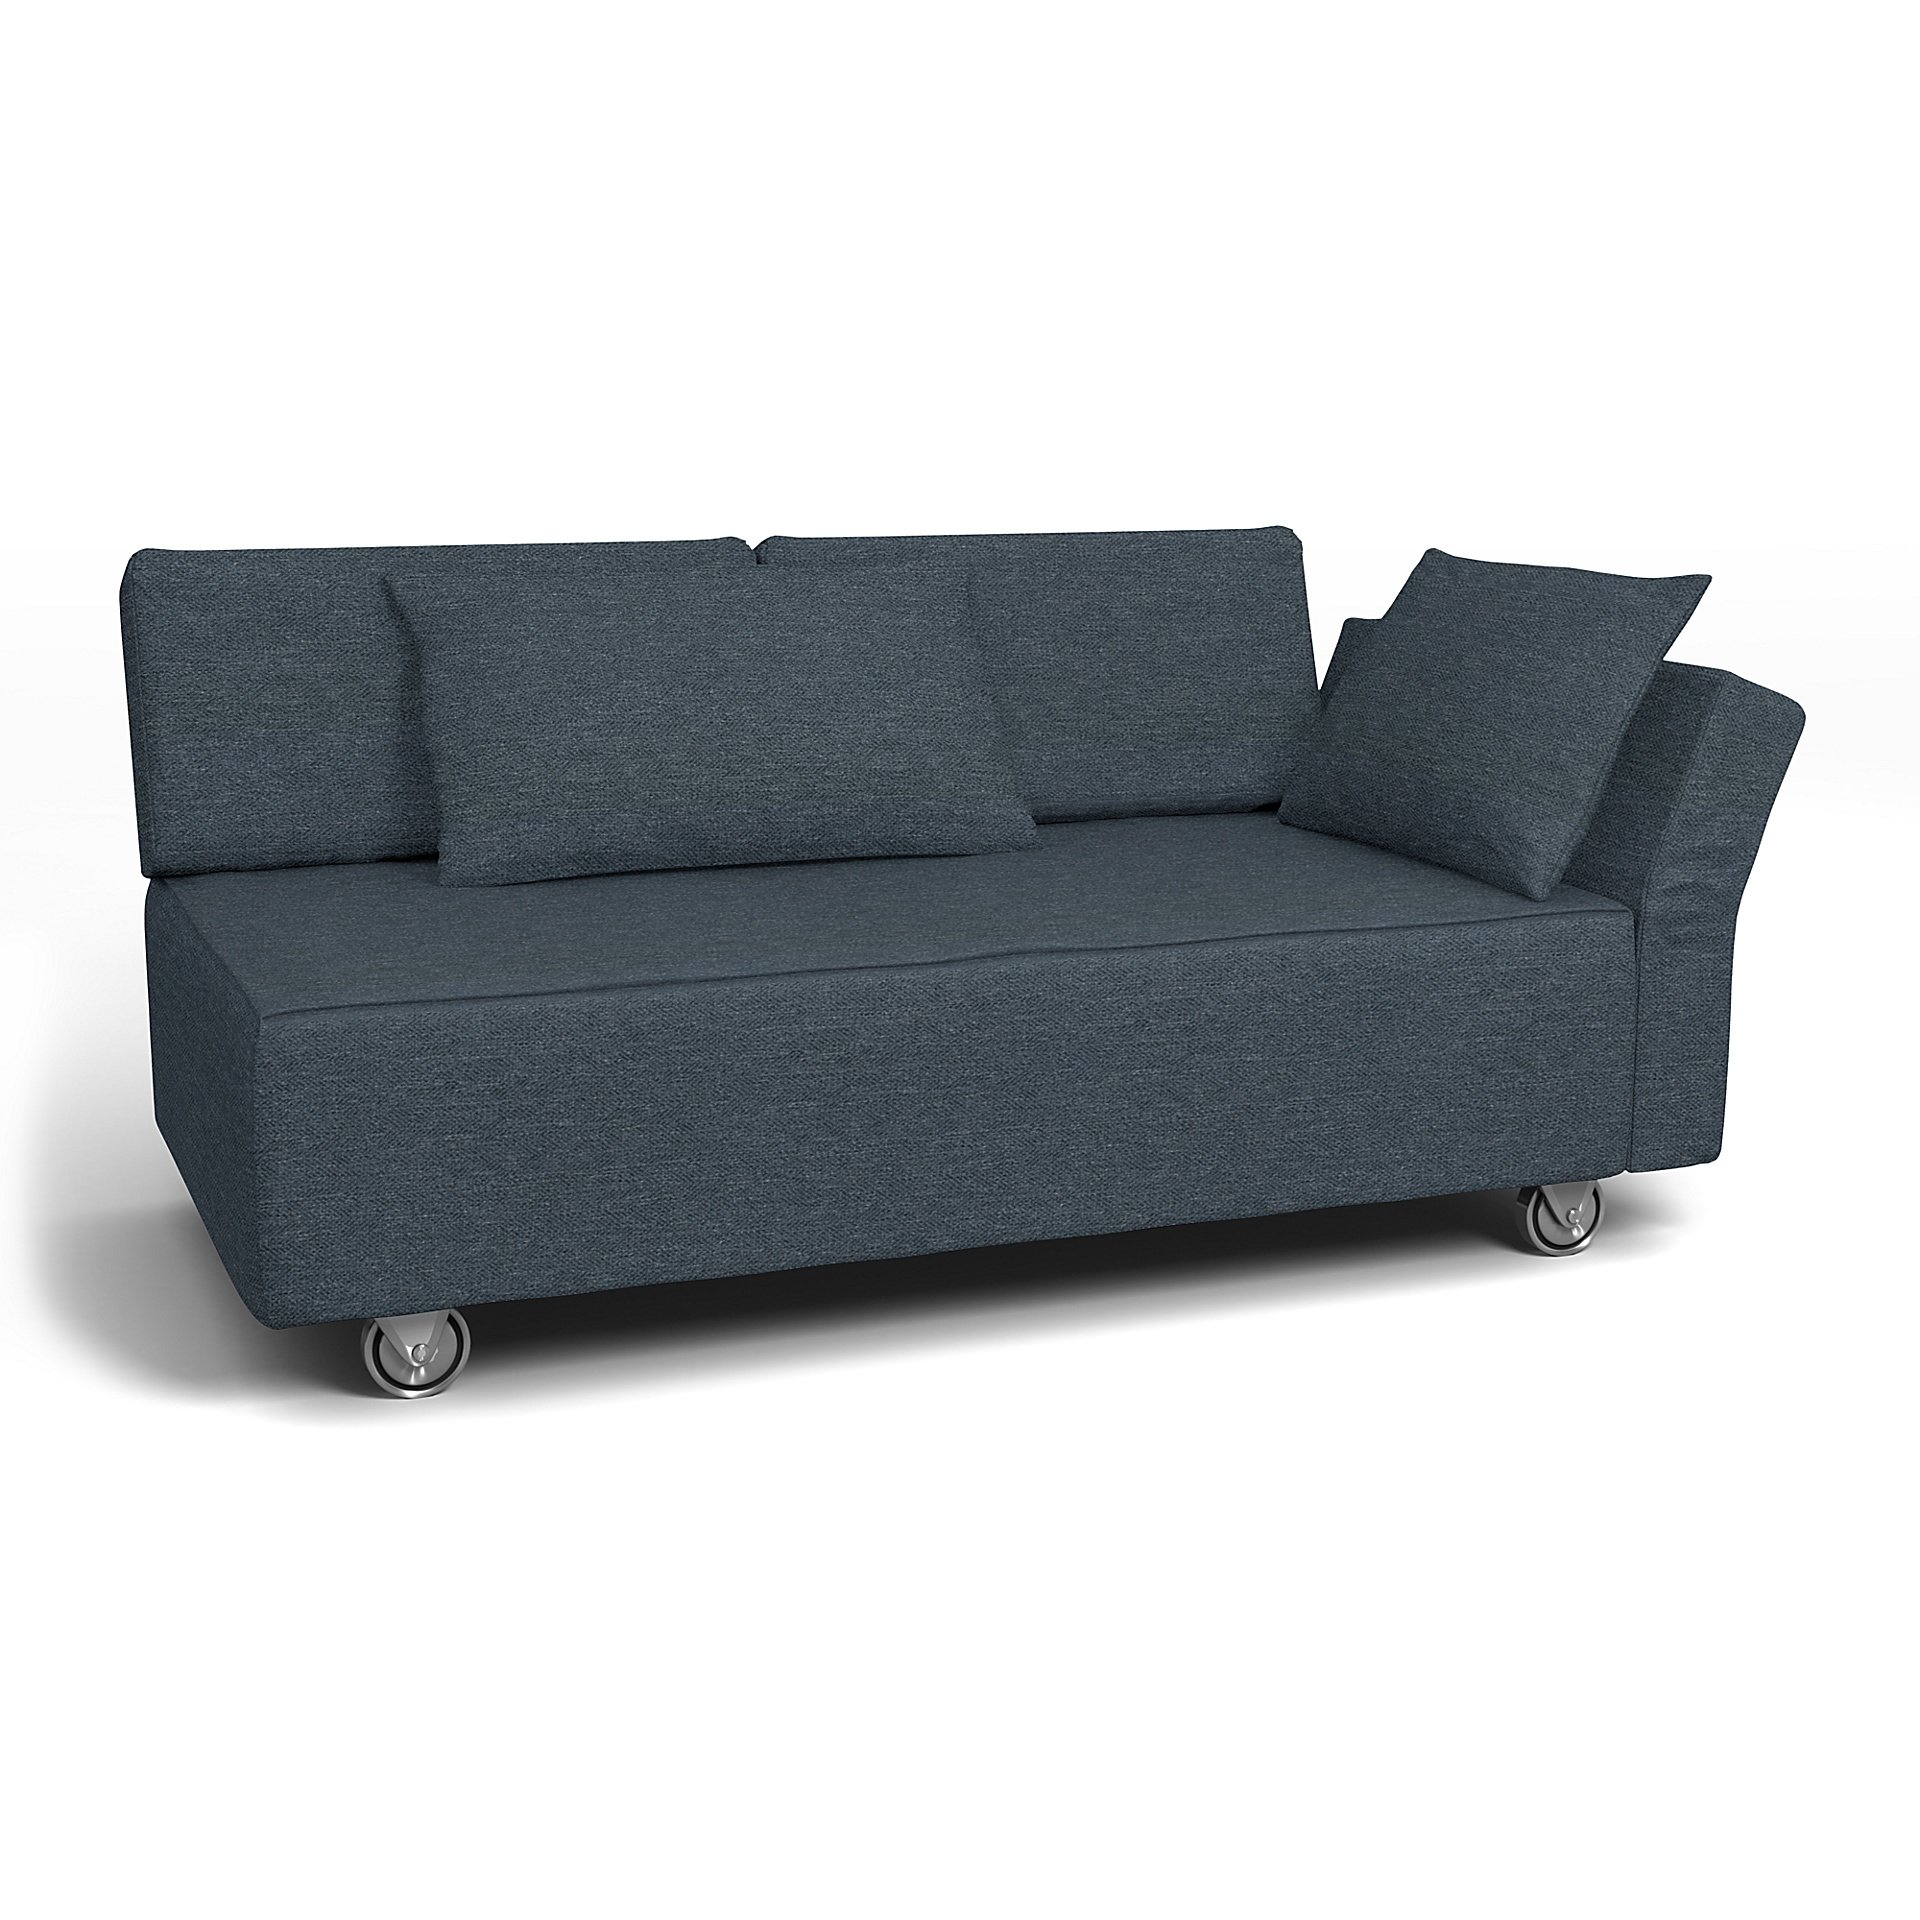 IKEA - Falsterbo 2 Seat Sofa with Right Arm Cover, Denim, Boucle & Texture - Bemz